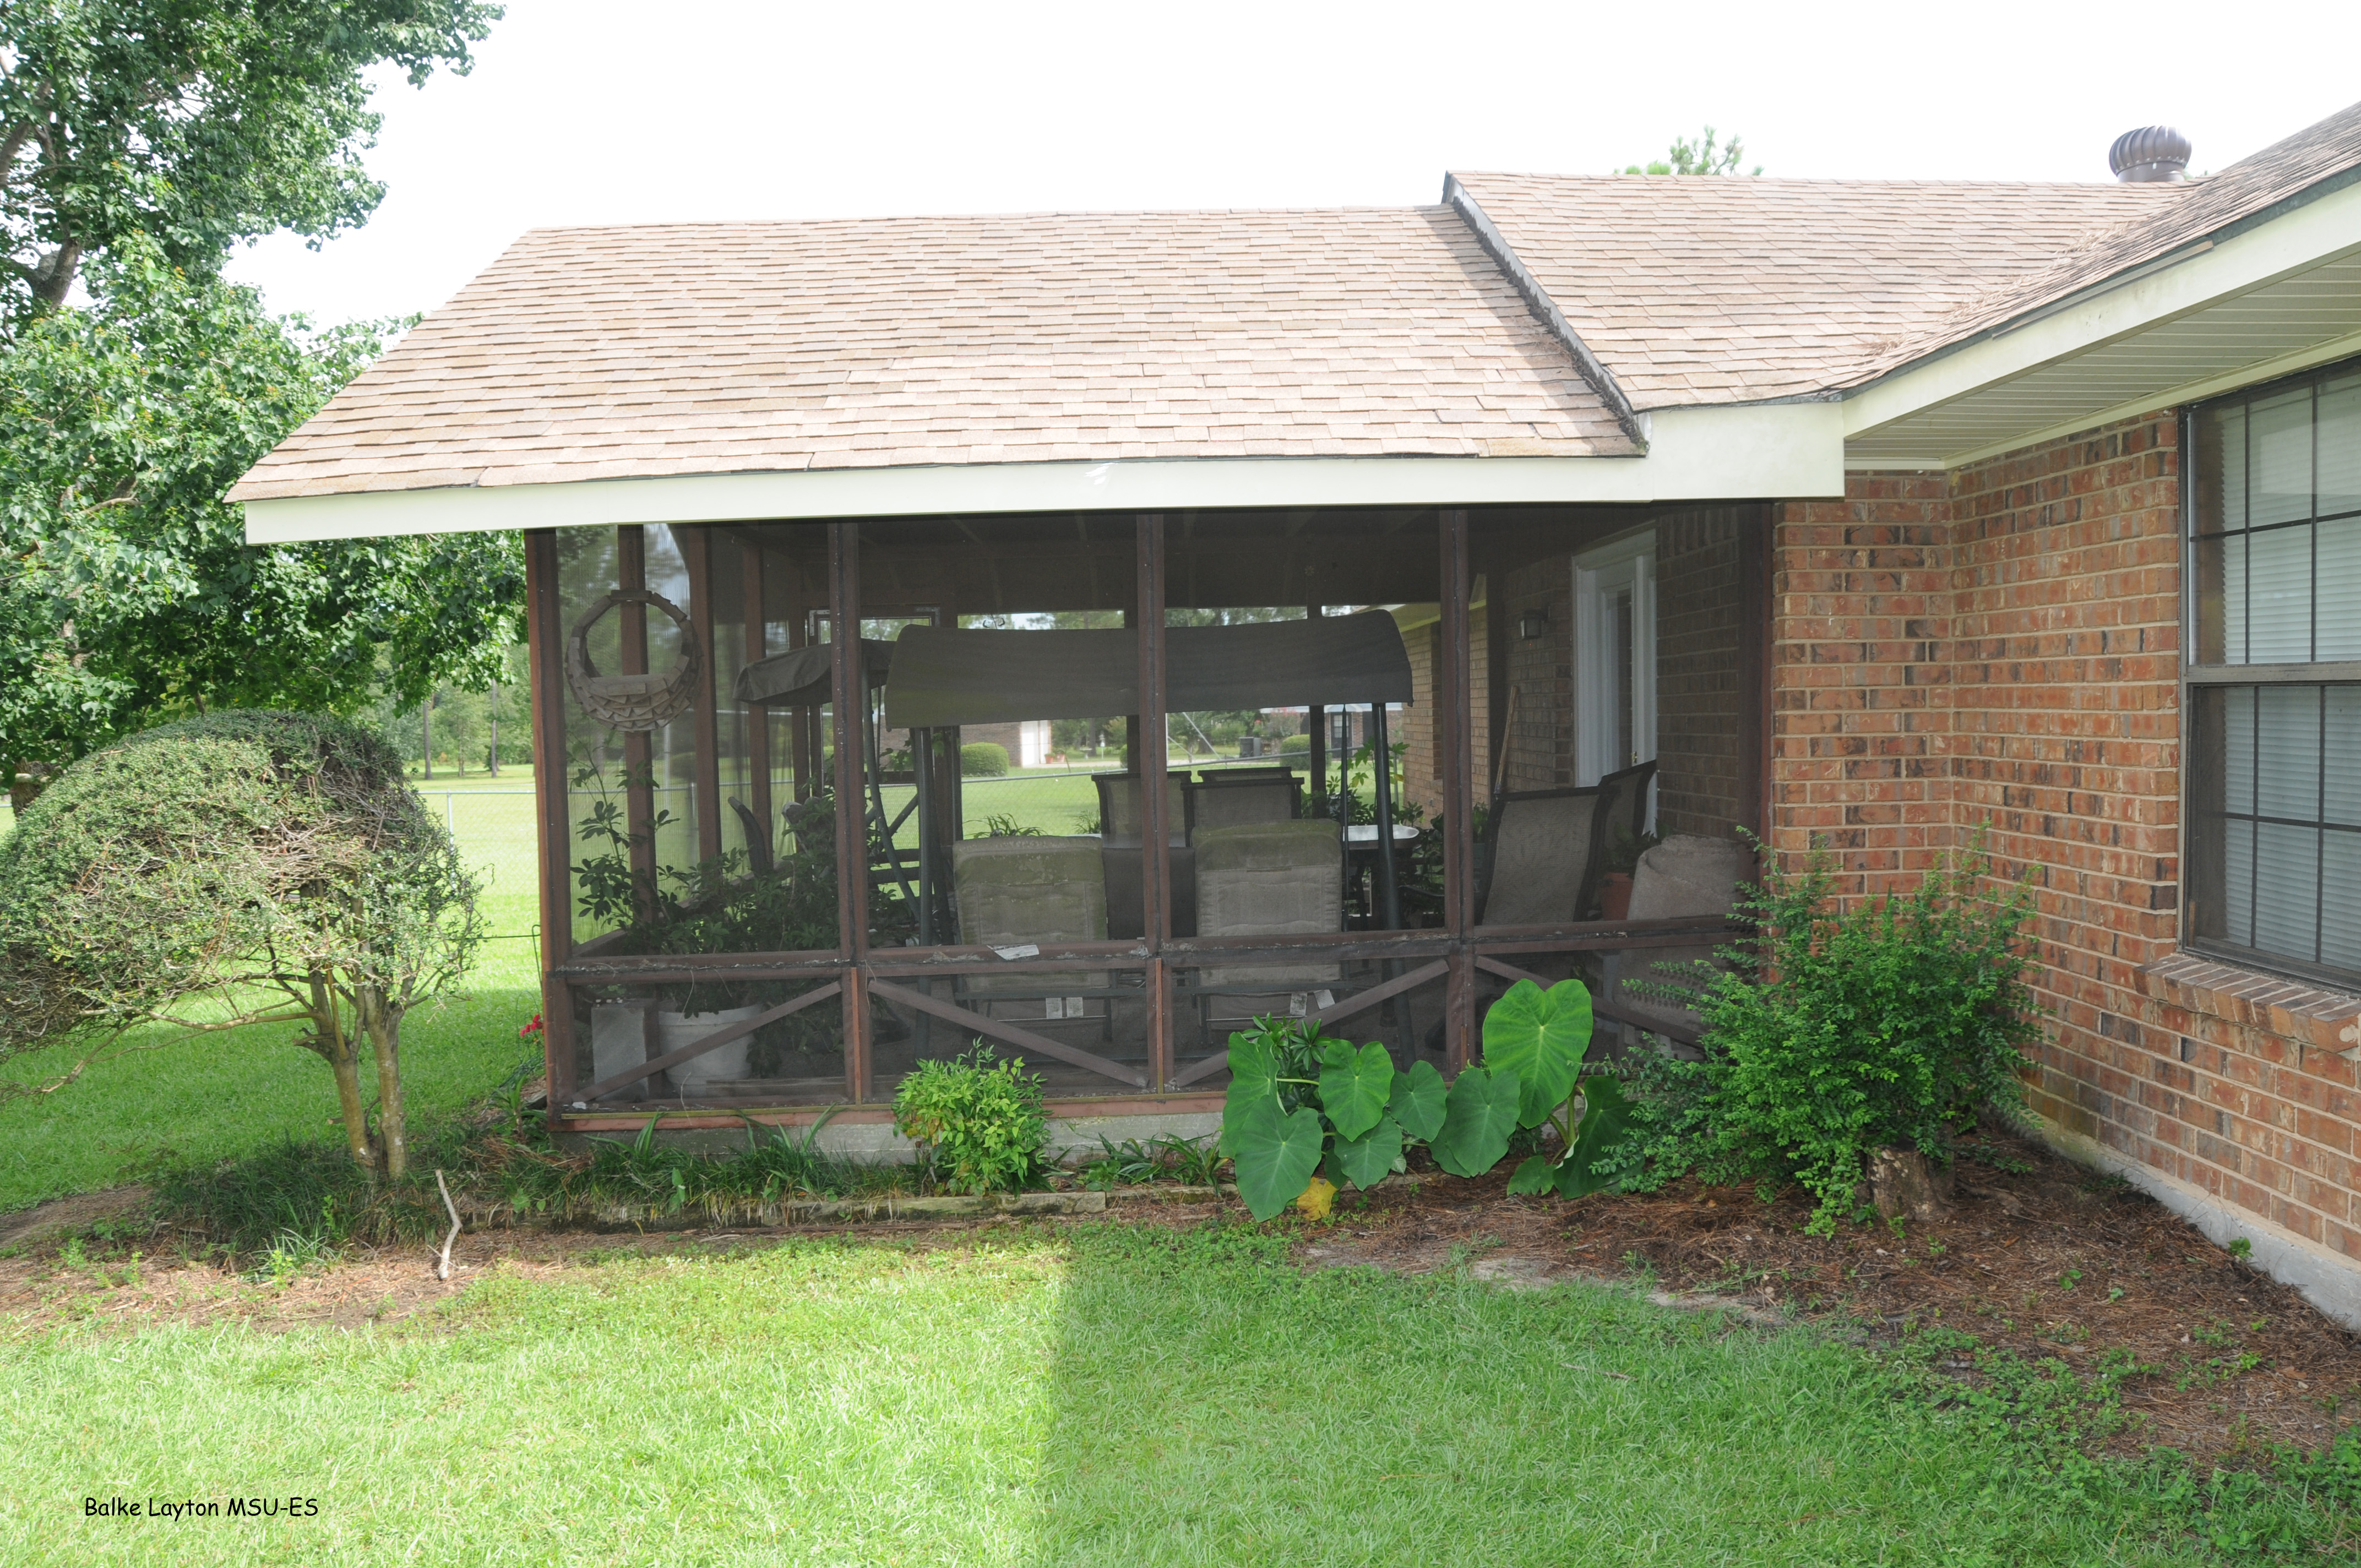 Adding a room, such as this screened-in porch, and not having it properly pretreated is a common cause of termite infestations.